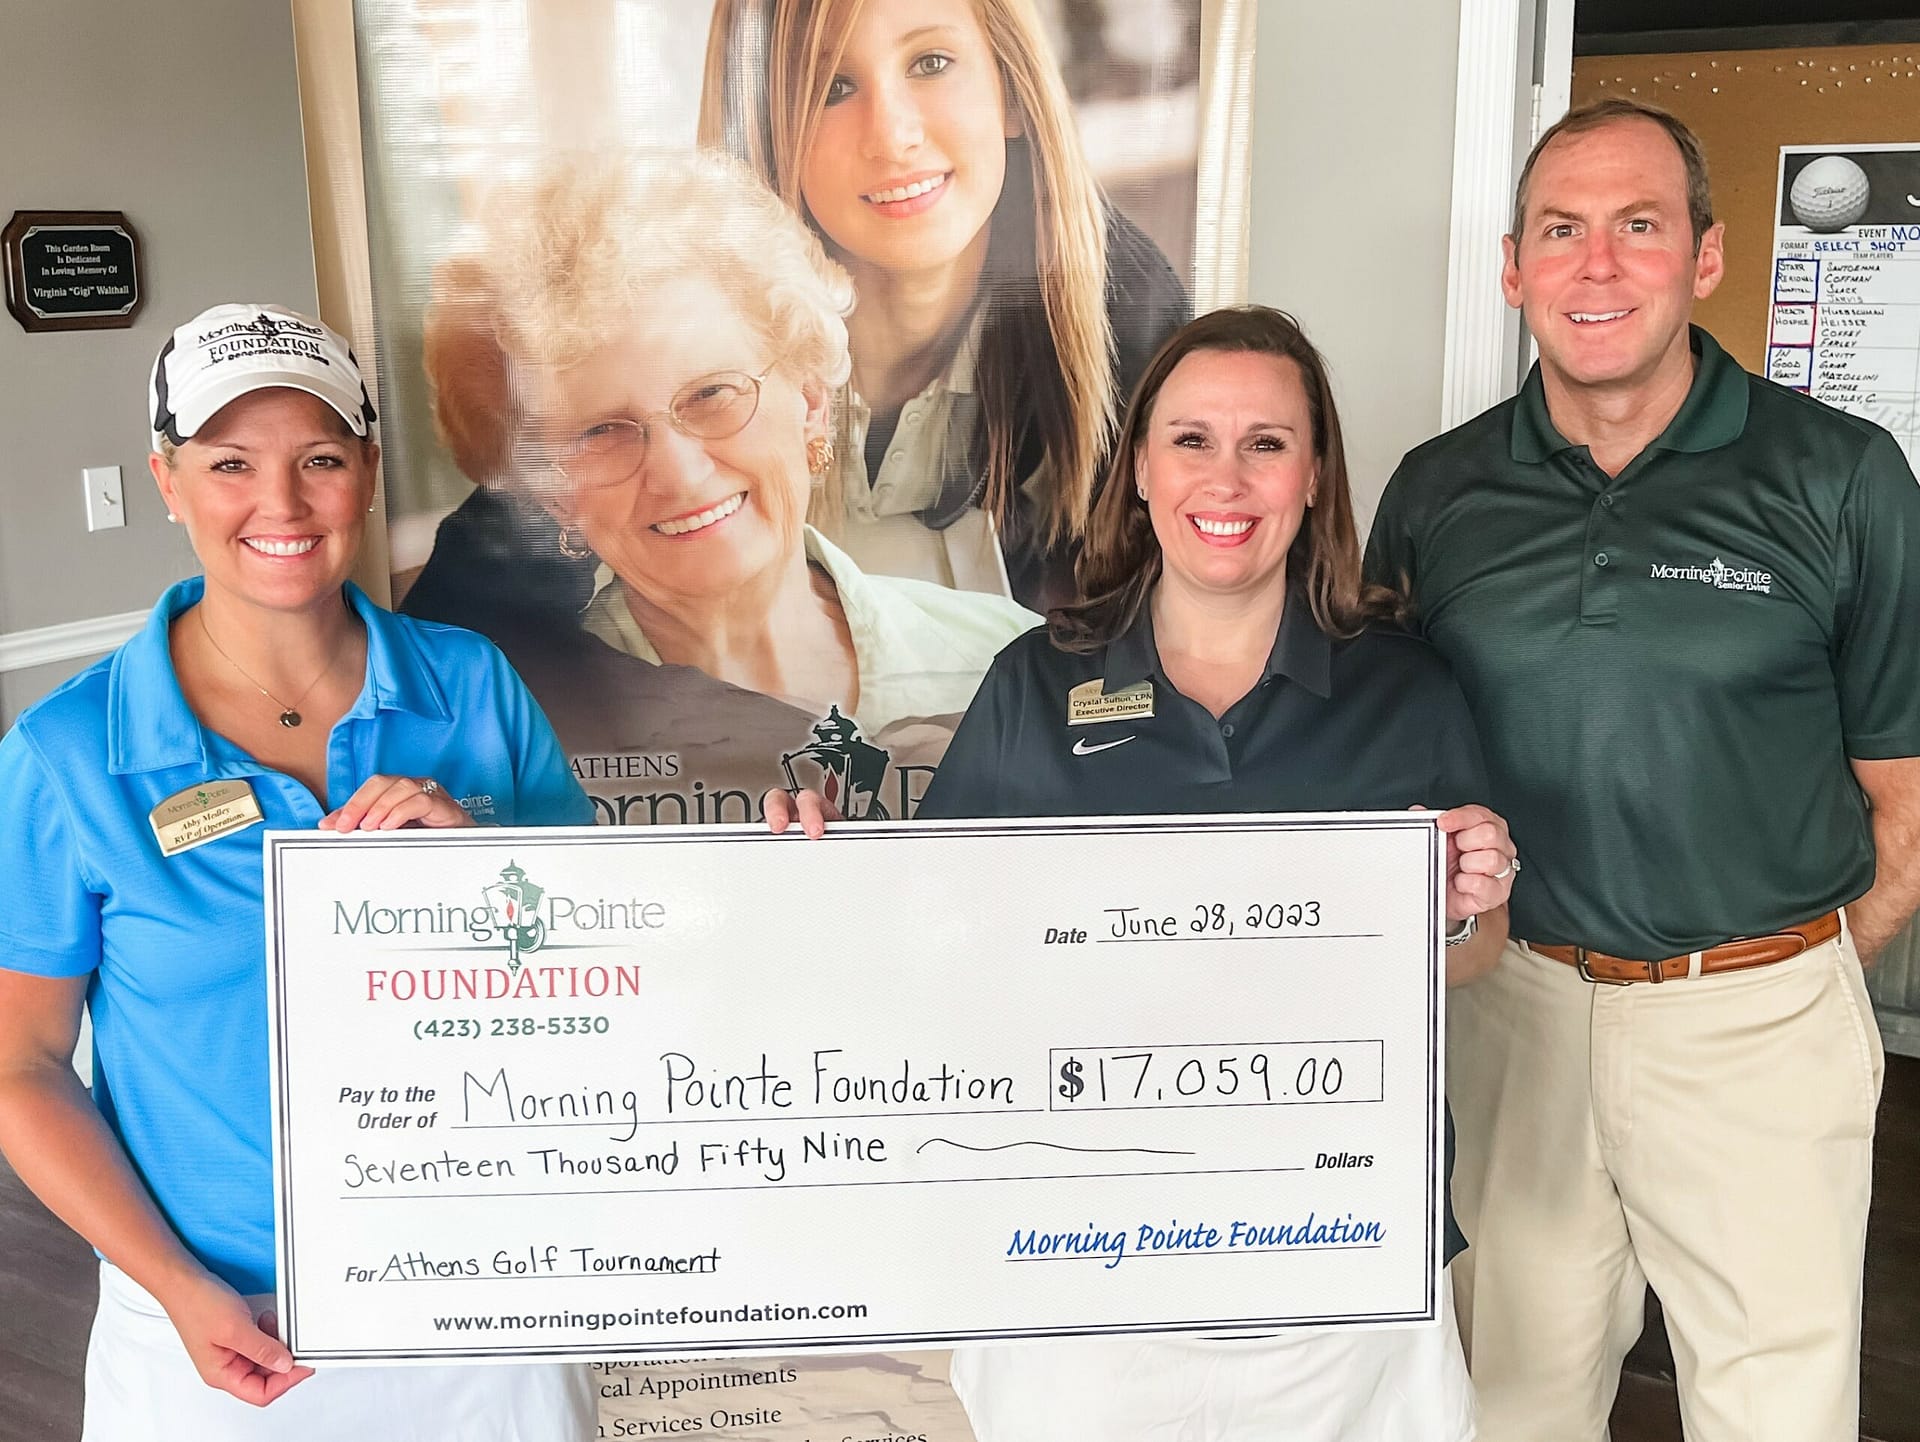 Photo of fundraising check for the Athens Golf Tournament